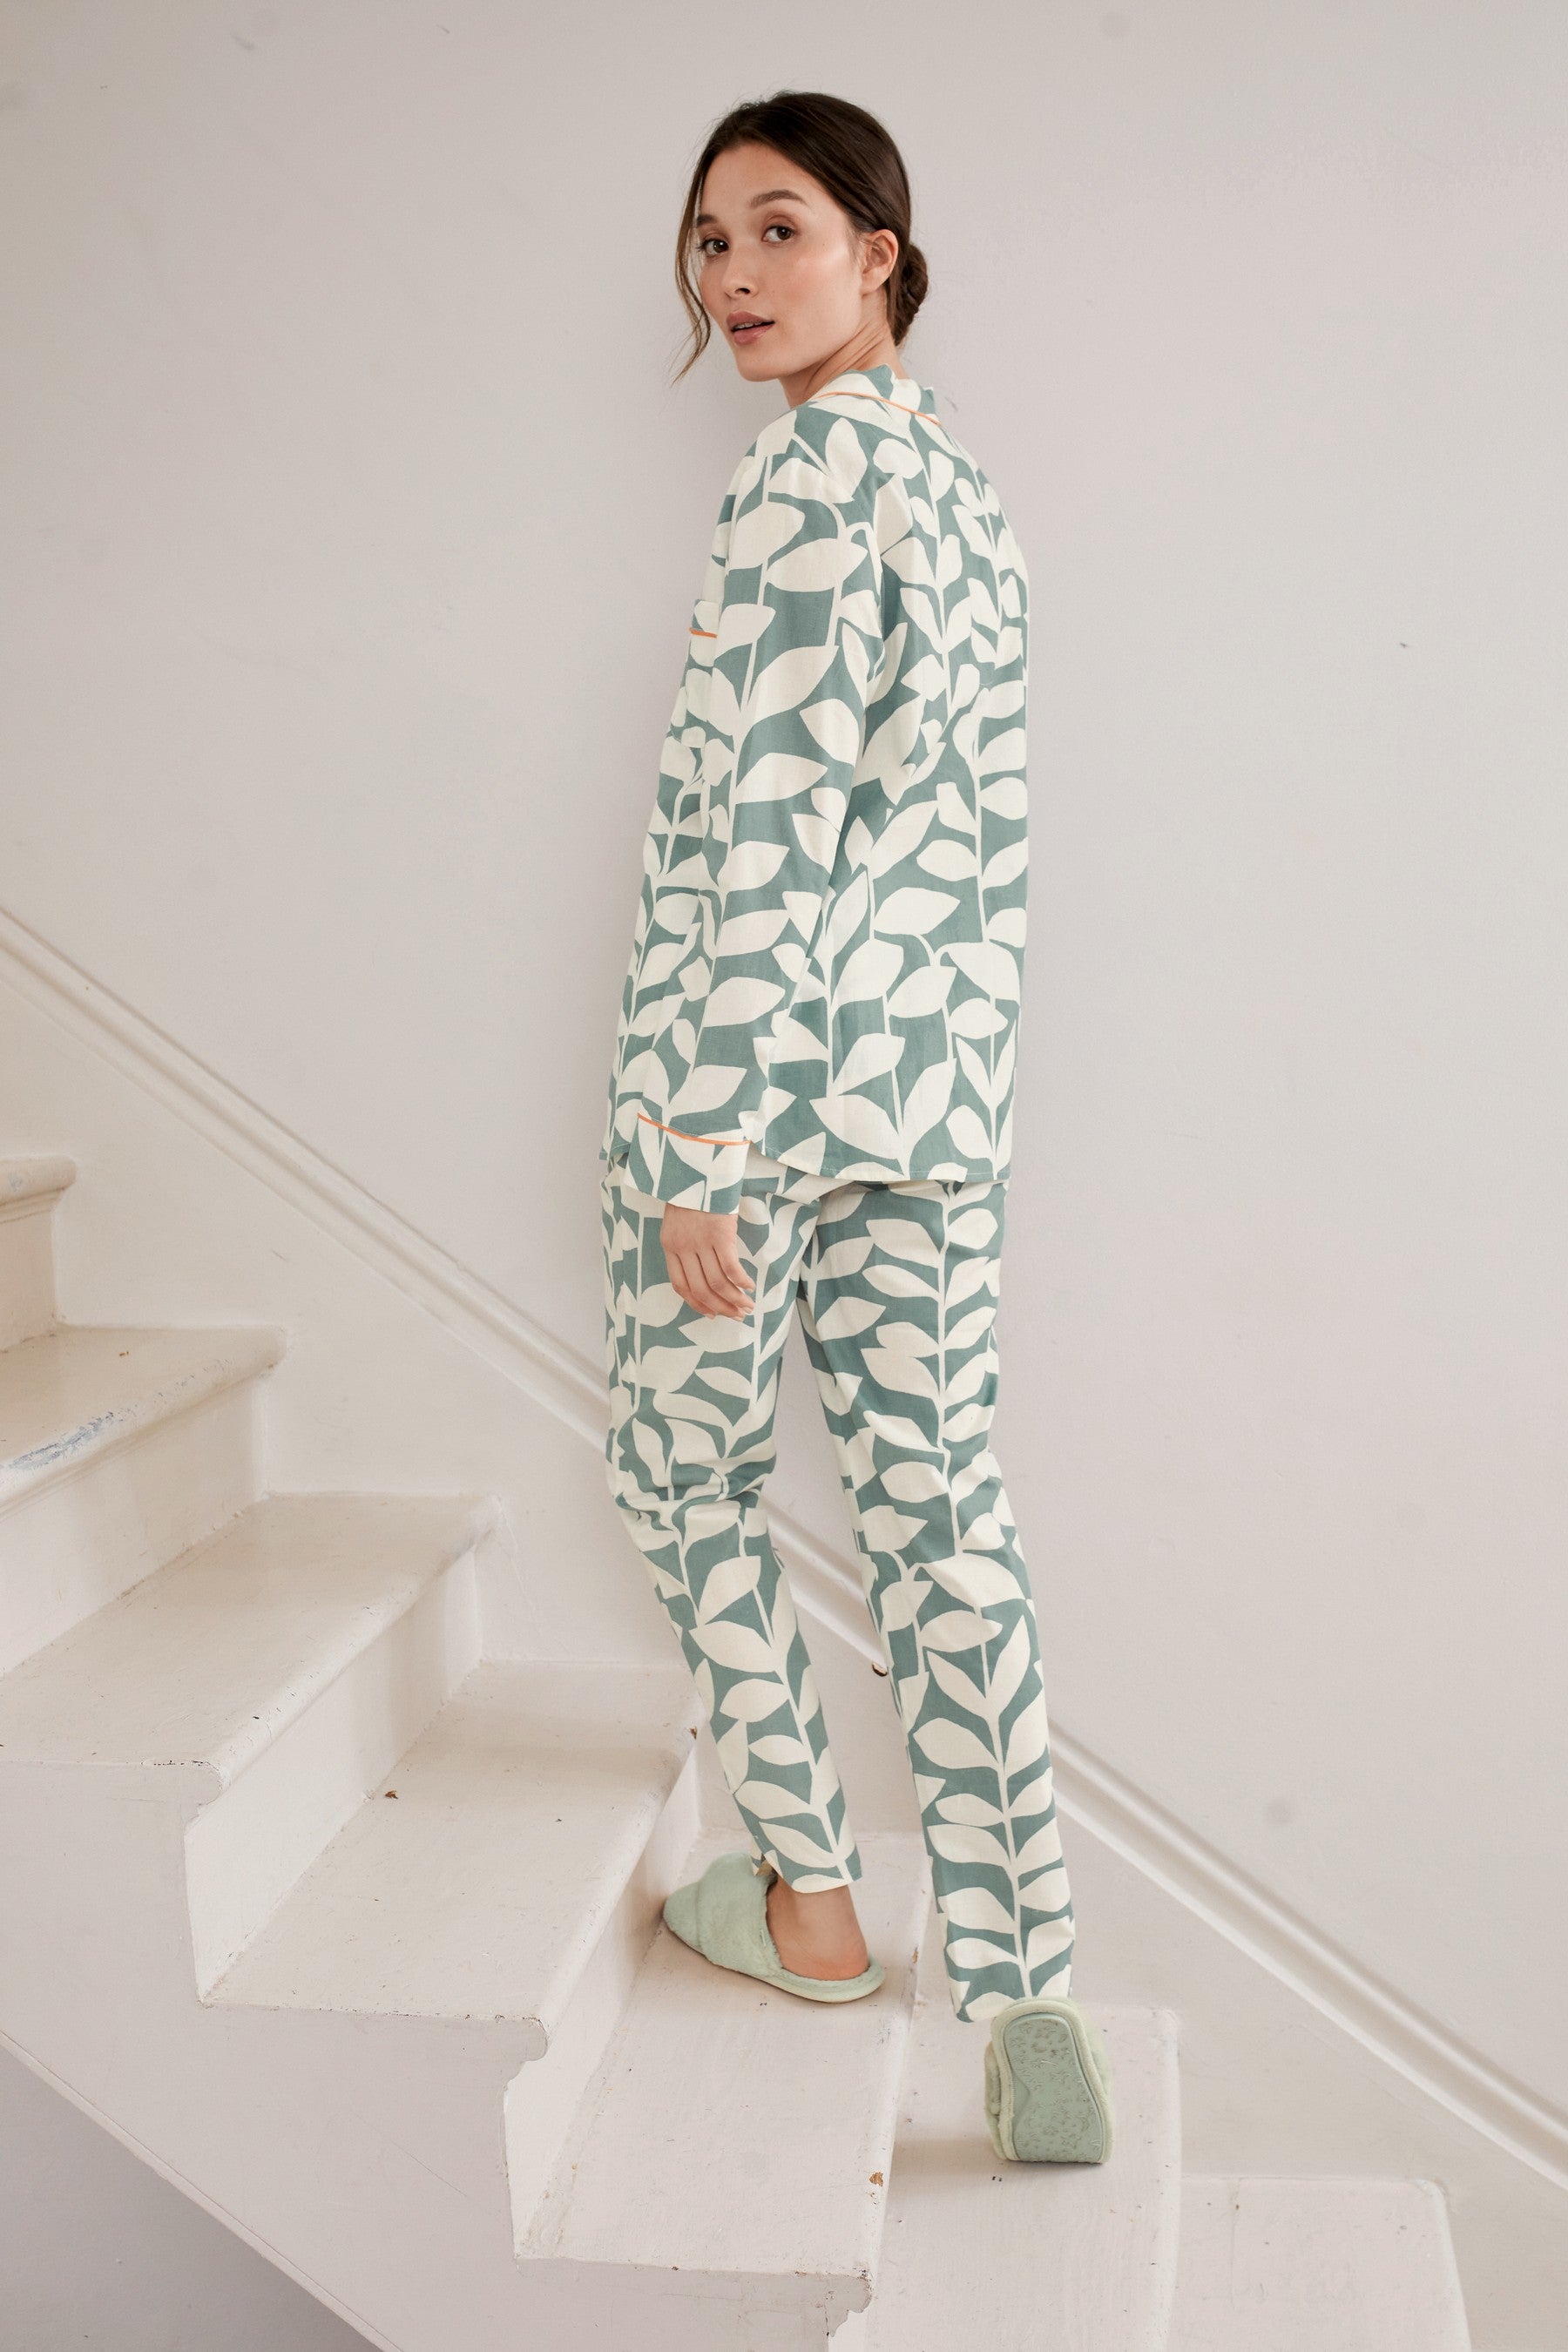 Gray Color Digital Abstract Printed loungewear/Nightsuit For Women With Pants.